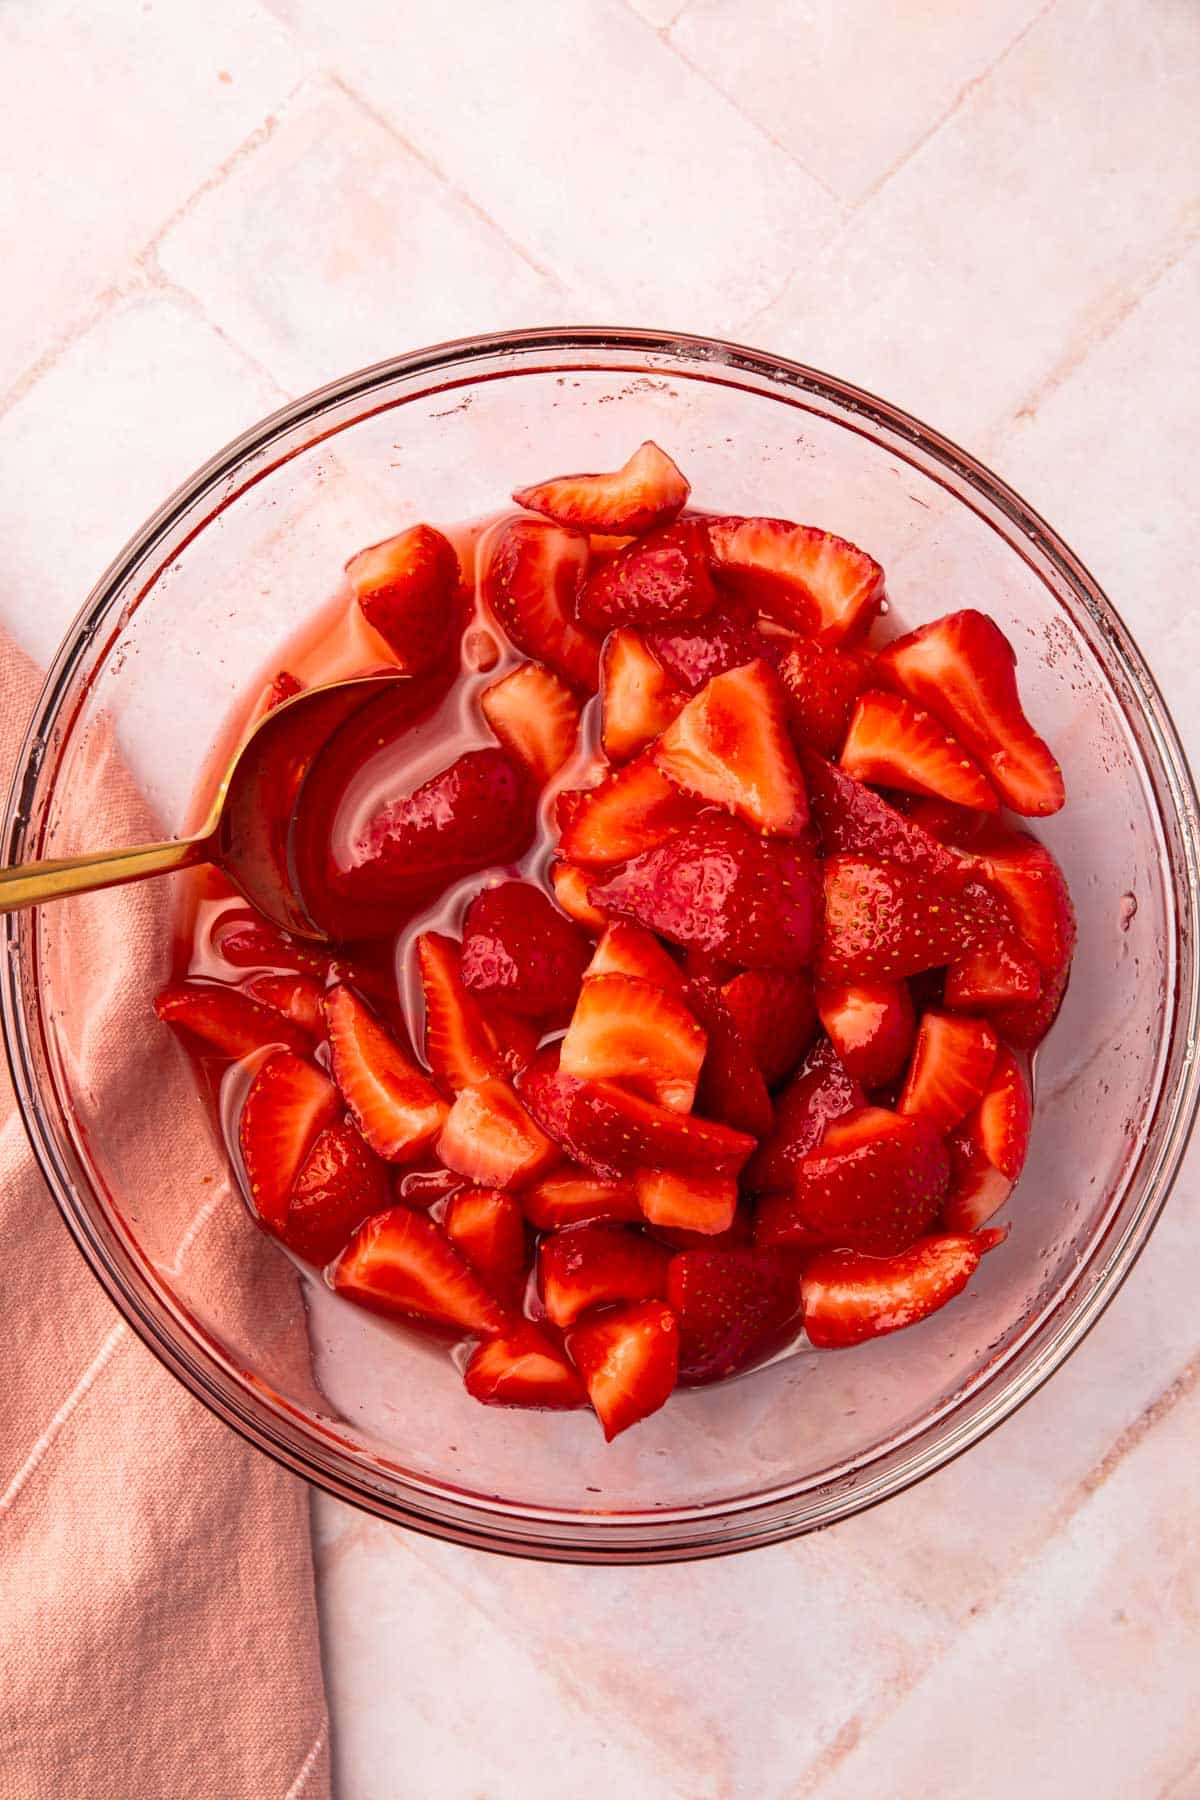 An overhead view of a glass bowl of macerated strawberries with a gold spoon.